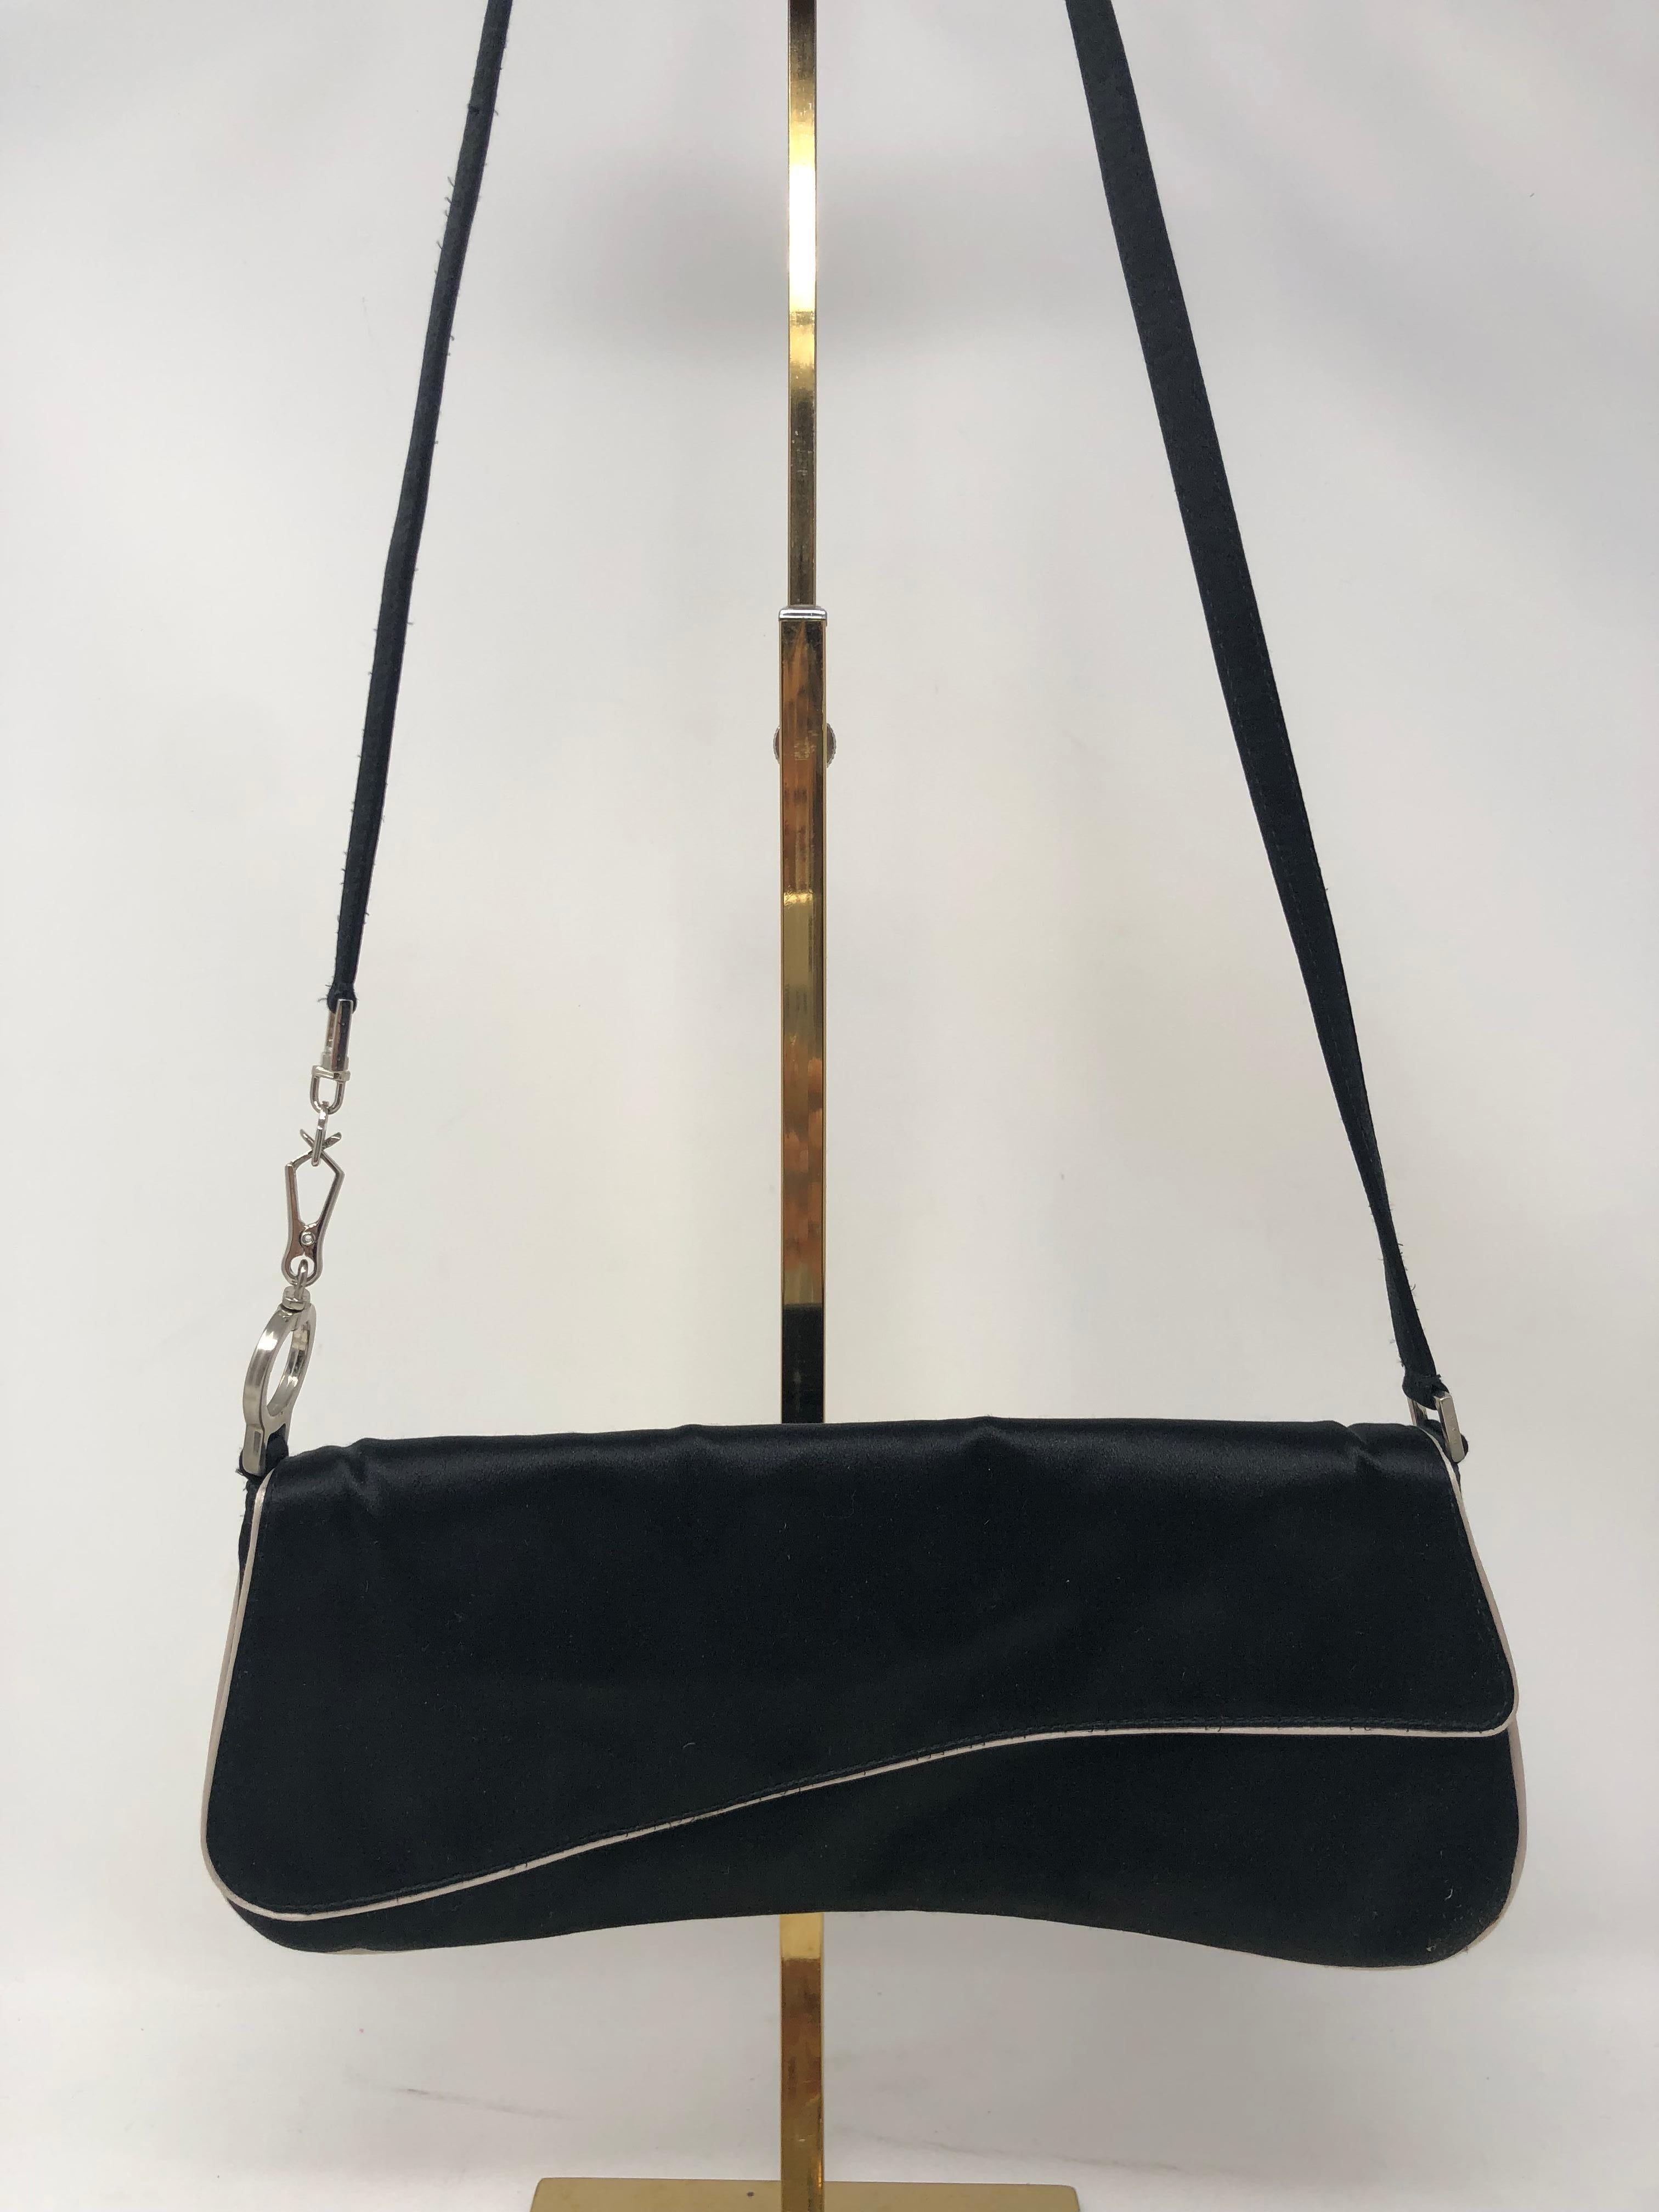 Prada Black Satin Shoulder Bag or Clutch. Can be worn as an evening bag or everyday. Mint like new condition. Prada is back and this is a timeless piece. Guaranteed authentic. 